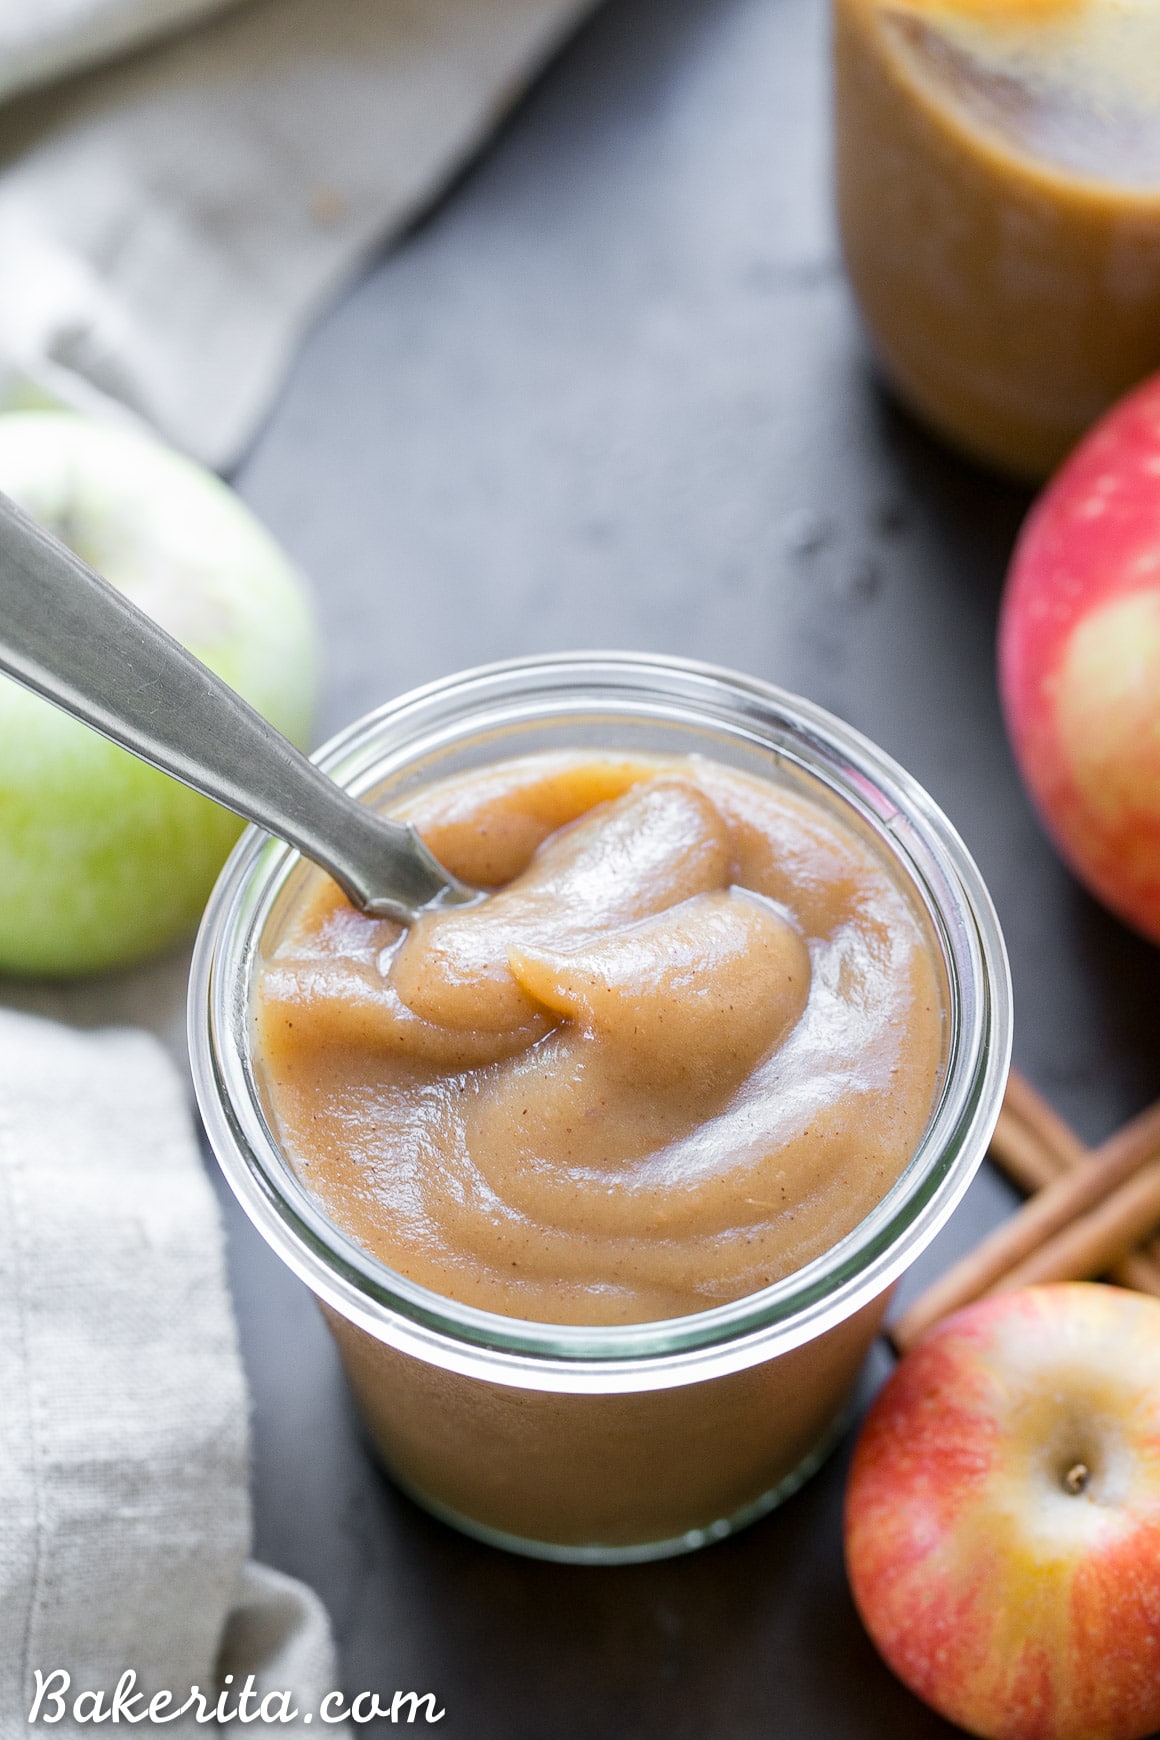 This Slow Cooker Apple Butter has no sugar added - just fresh apples, cinnamon, nutmeg, and lemon juice. This healthy homemade apple butter can be enjoyed on toast, stirred into oatmeal or yogurt, or eaten by the spoonful! It's Paleo-friendly and vegan.